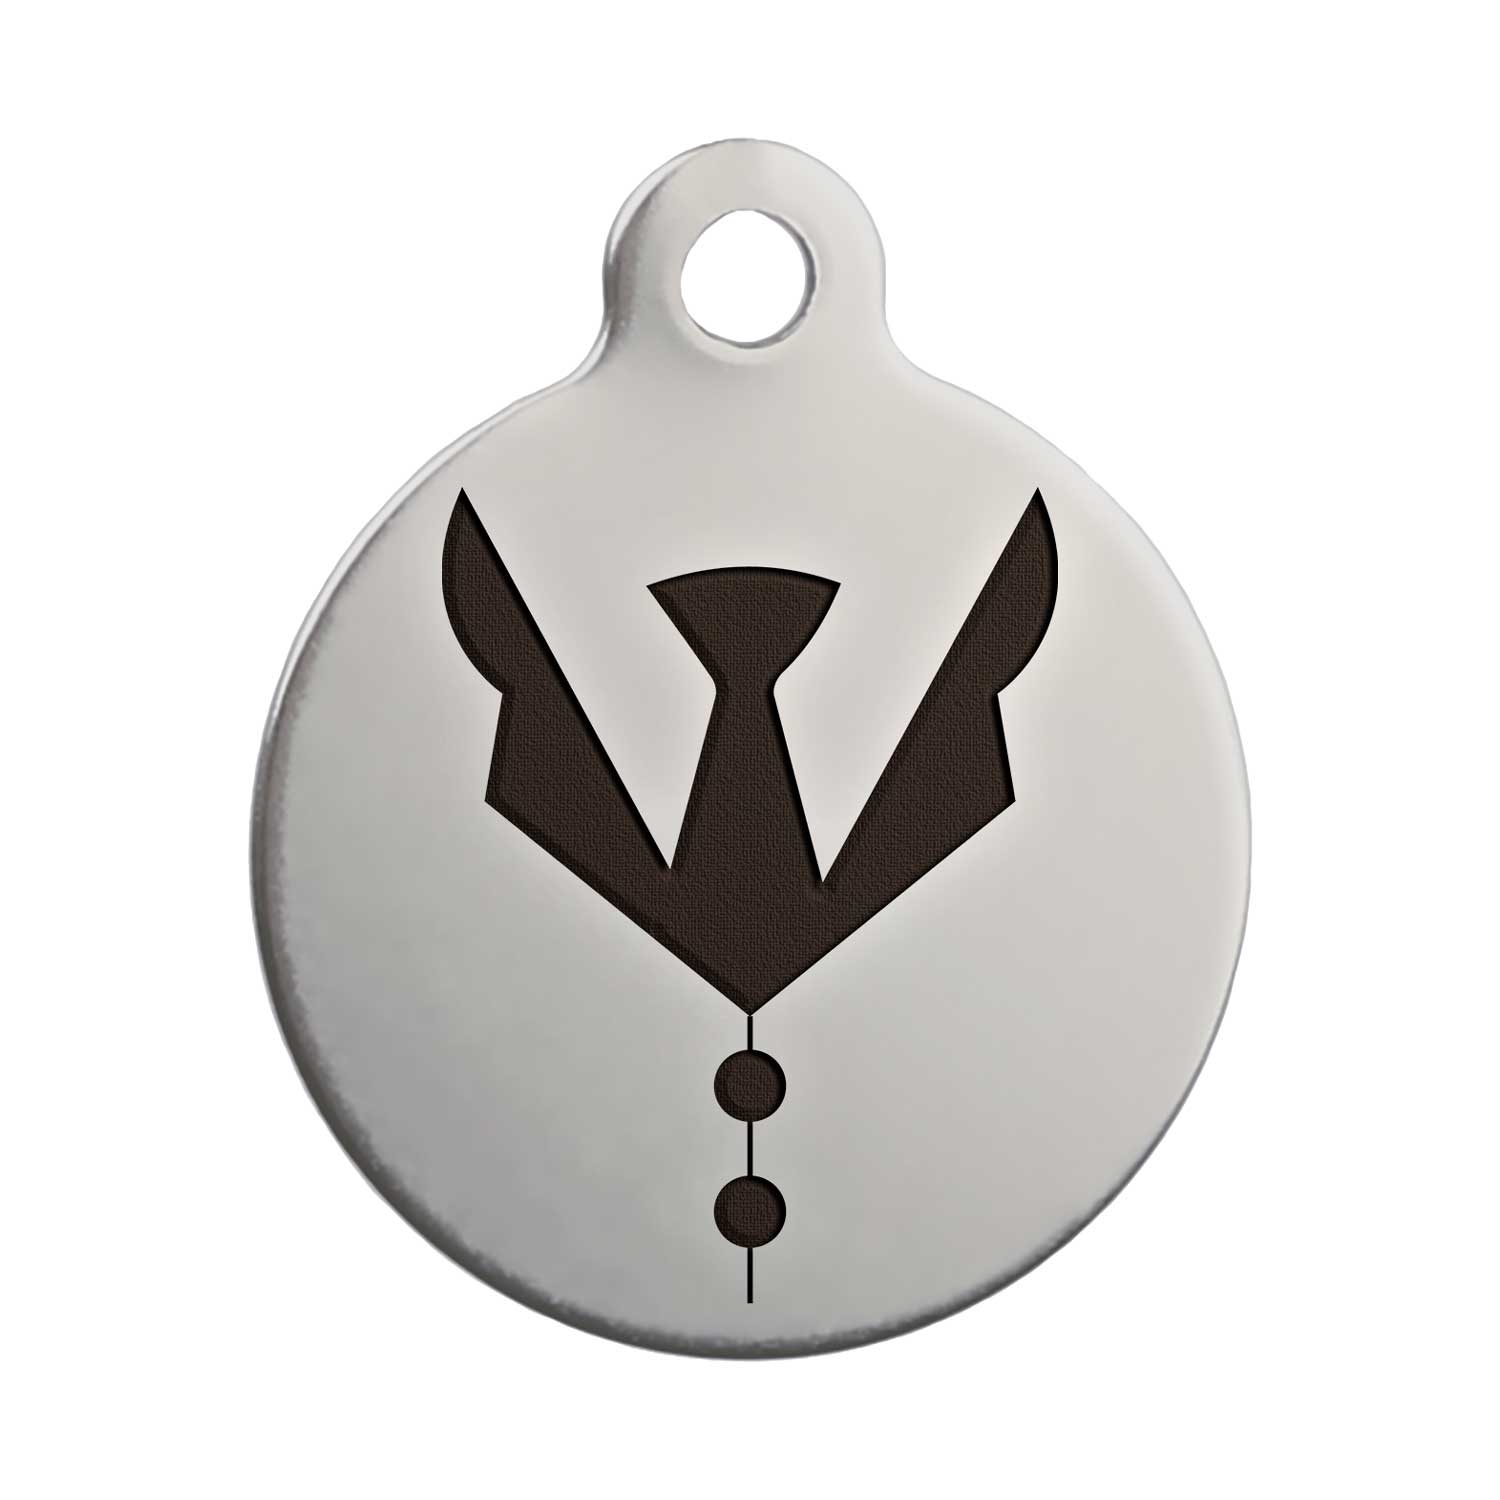 dogIDs Signature Fancy Suit and Tie Dog ID Tag Stainless Steel Round